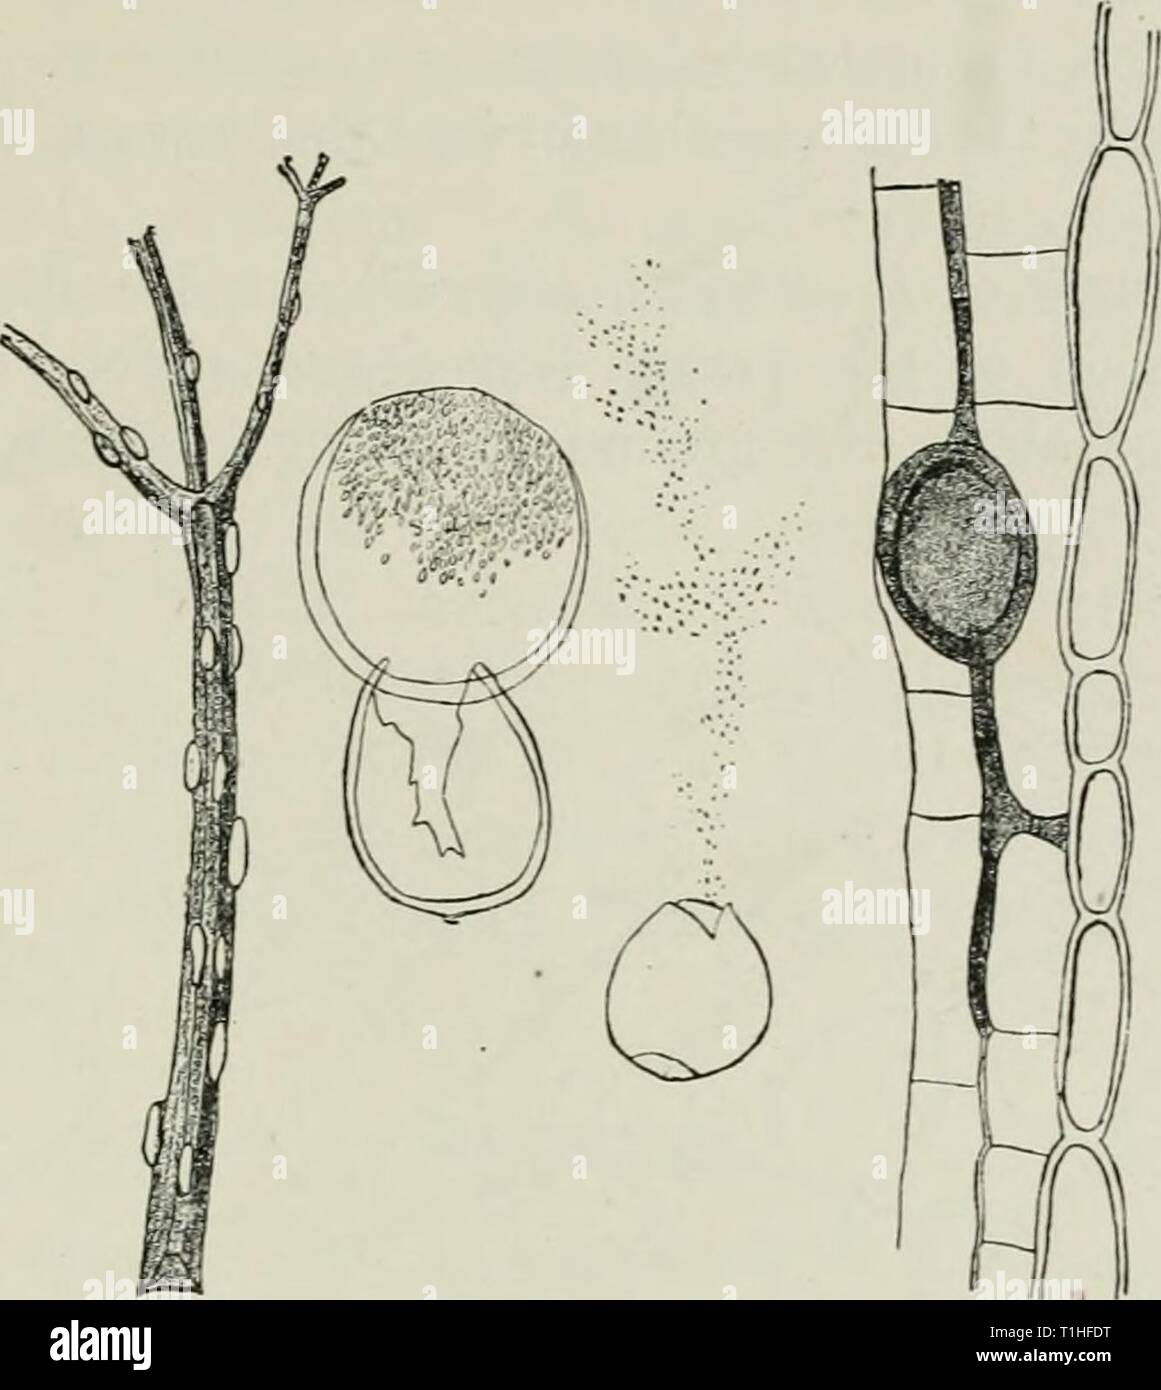 Diseases of plants induced by Diseases of plants induced by cryptogamic parasites; introduction to the study of pathogenic Fungi, slime-Fungi, bacteria, & Algae  diseasesofplant00tube Year: 1897  PROTOMYCES. 139 distributing itself through the intercellular spaces, stimulates the parenchyma-cells of the host to growth and cell-division. The    Fig. 45.—Protomyces macrosporiis on leaf-stalk of AegopoO.ium Pod.agro.rio.. A, Mycelium and sporangium in- the tissue under the epidermis. B, Sporangia in stages of development, (v. Tubeuf del.) latter is a secondary process and consists (see Fig. 9) in Stock Photo